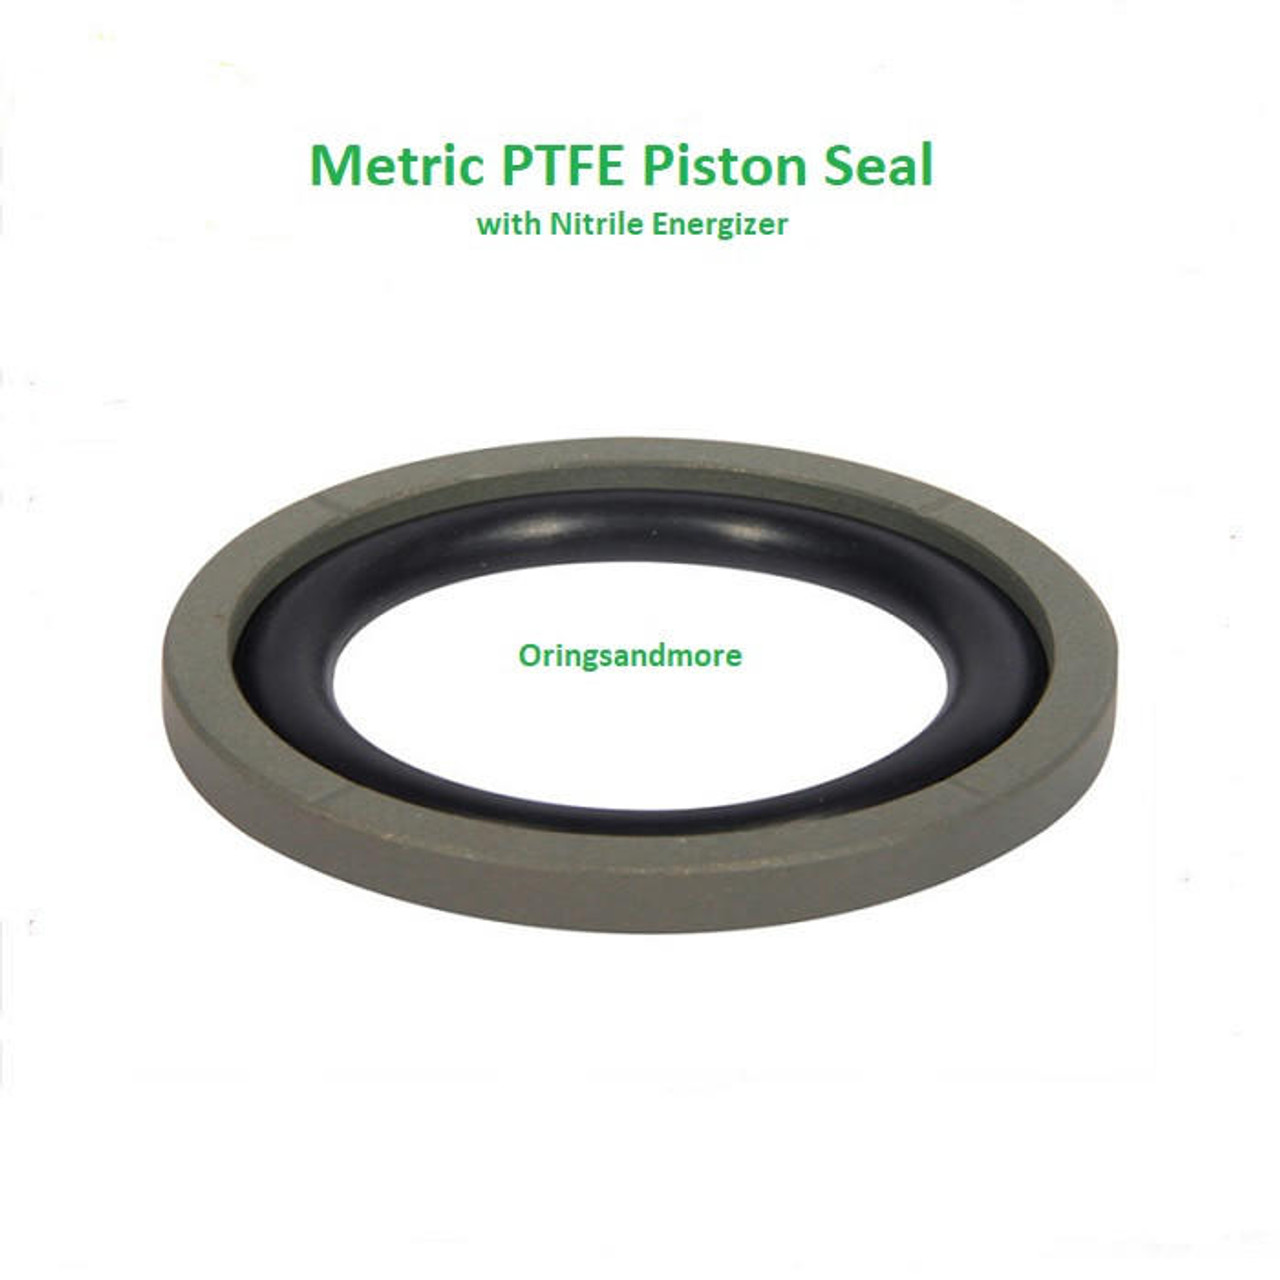 PTFE Piston Seal 32mm OD x 24.5mm ID x 3.2mm   Price for 1 pc